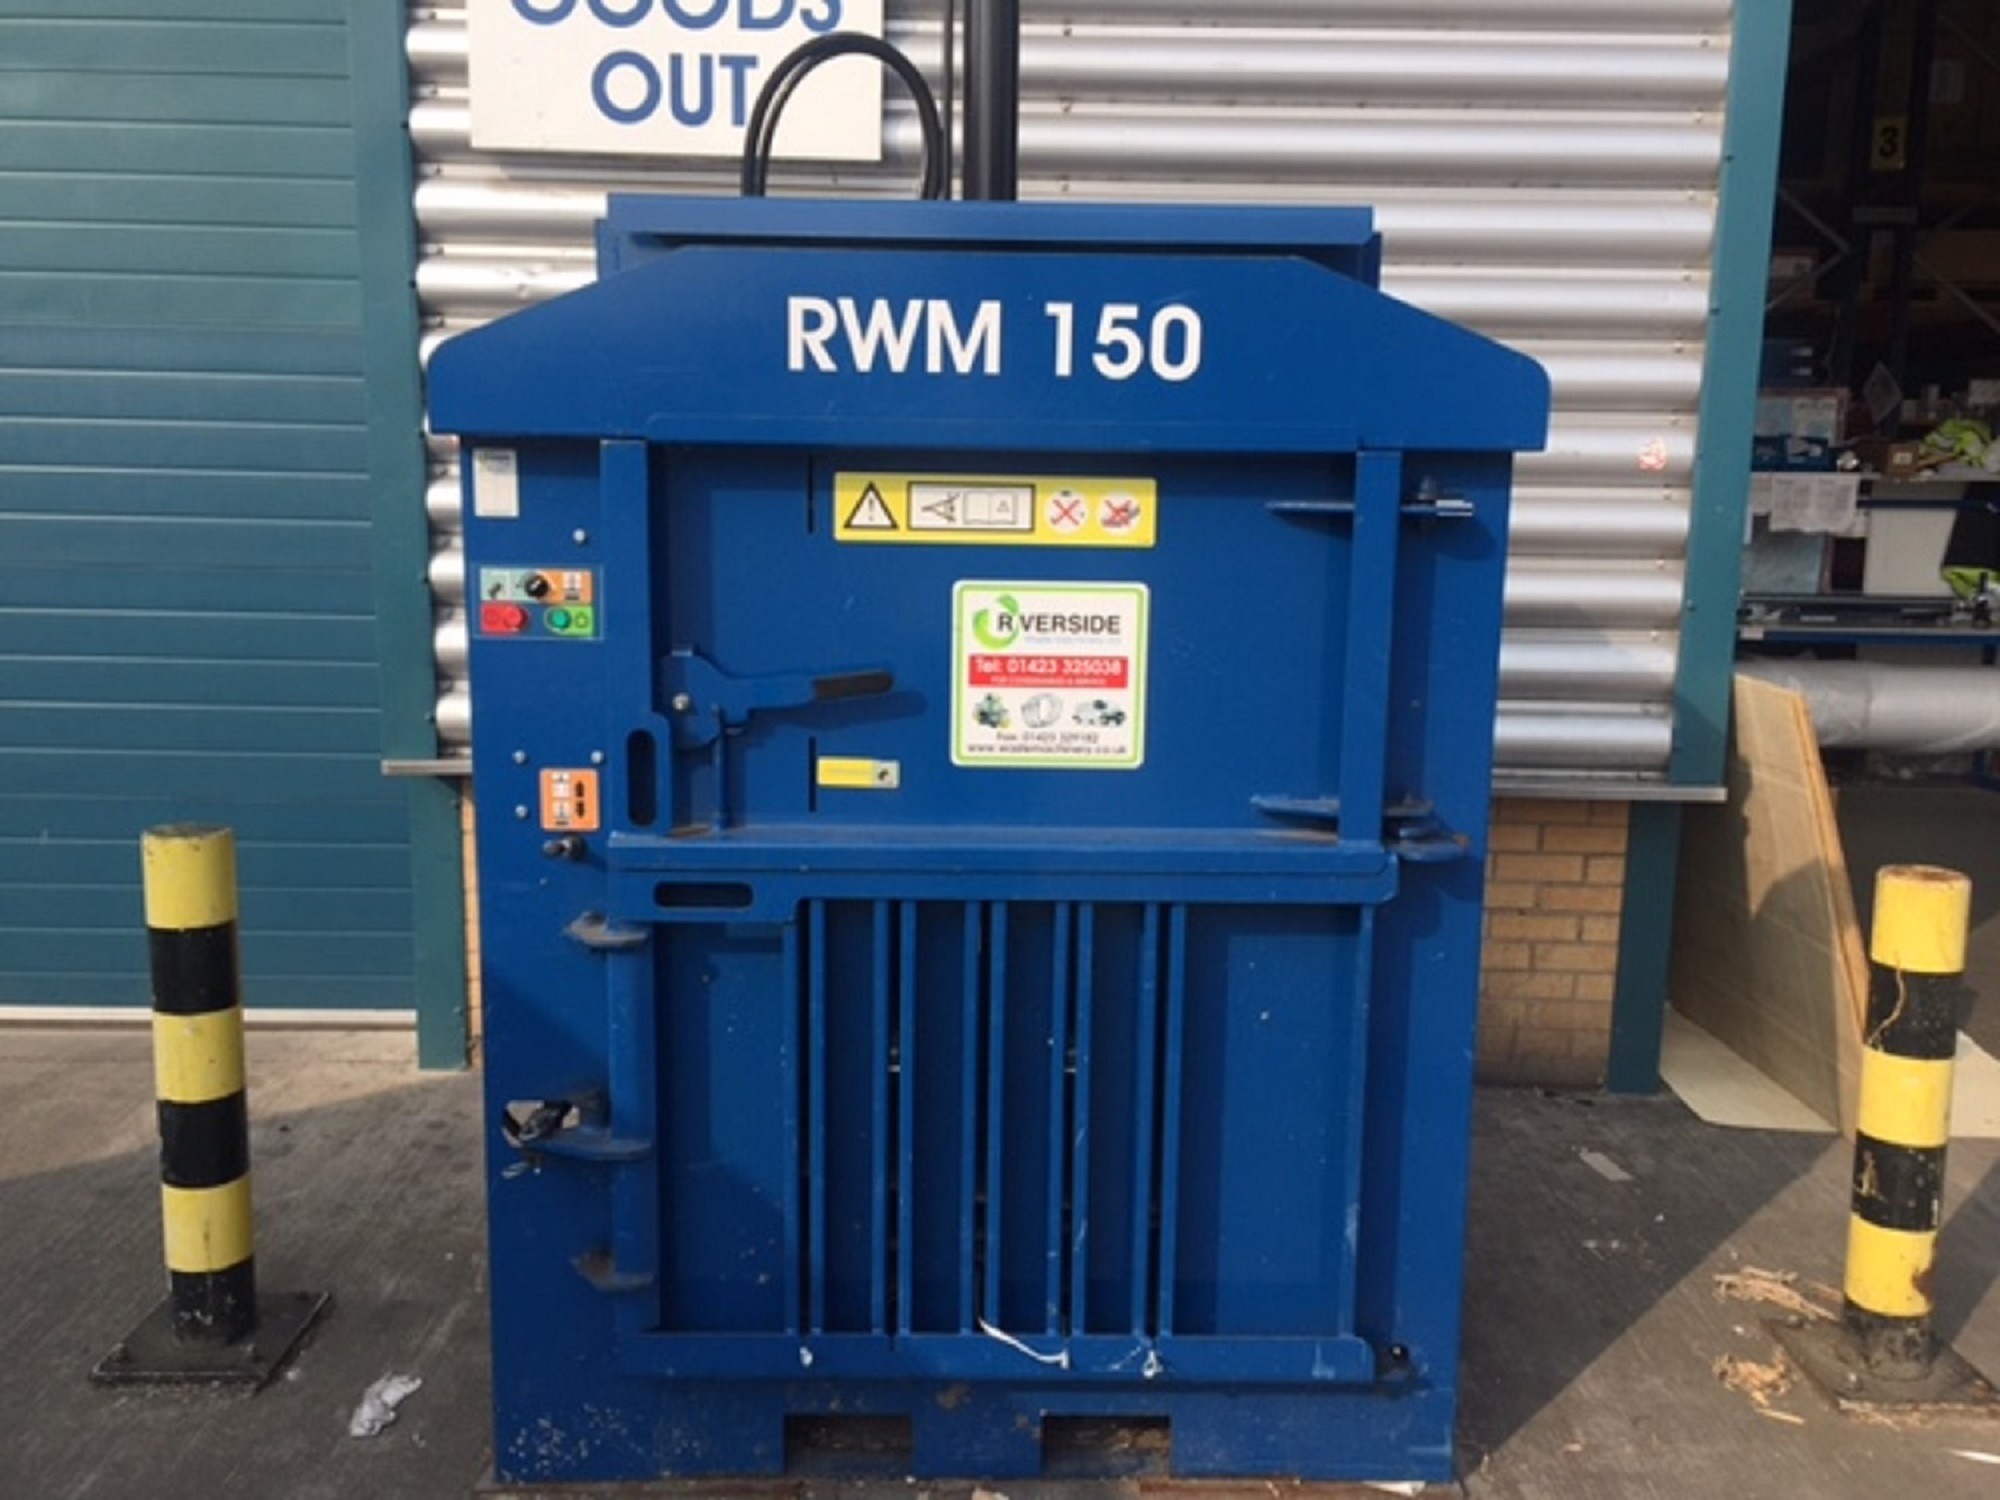 Edmundson Electrical invests in waste baler in quest to ‘go green’